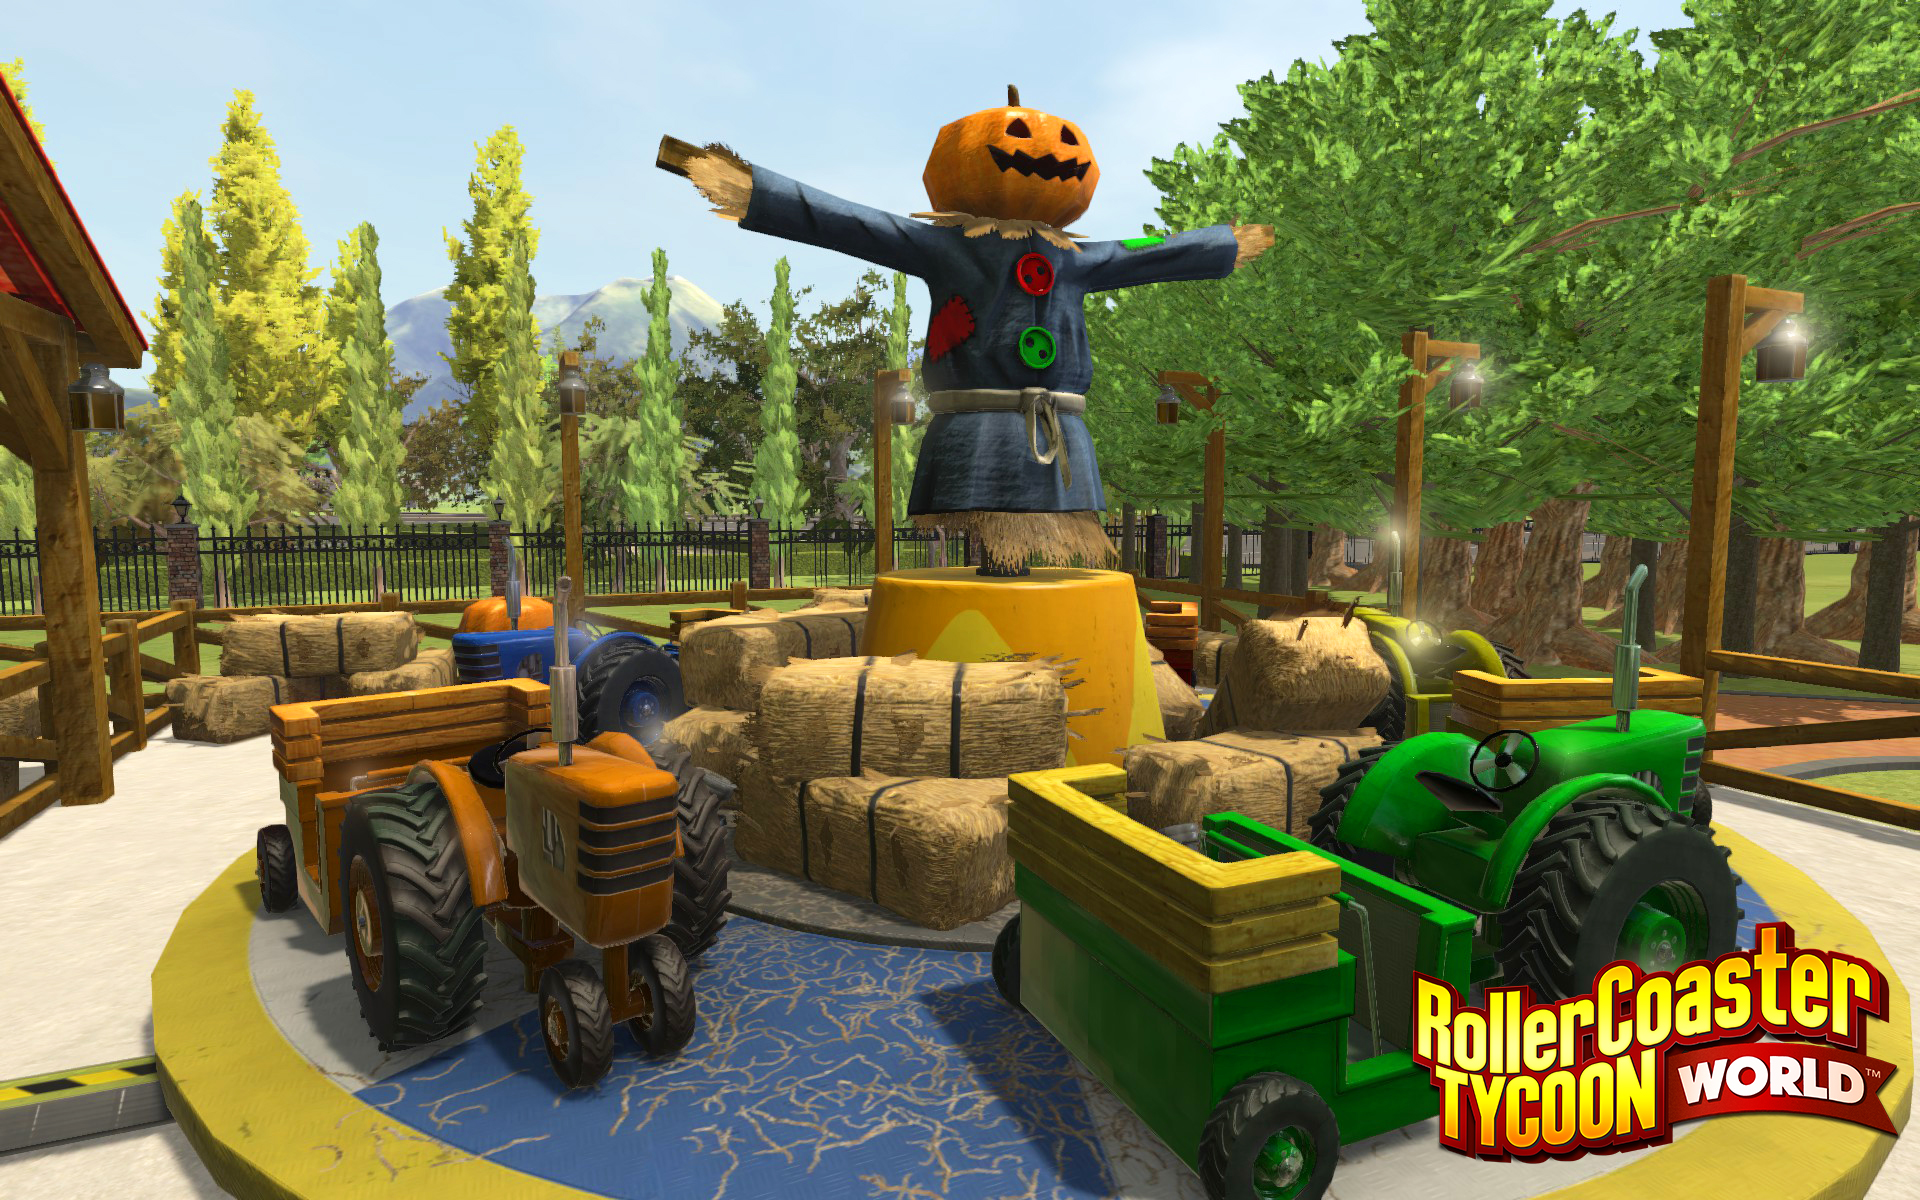 RollerCoaster Tycoon World Set for December Release